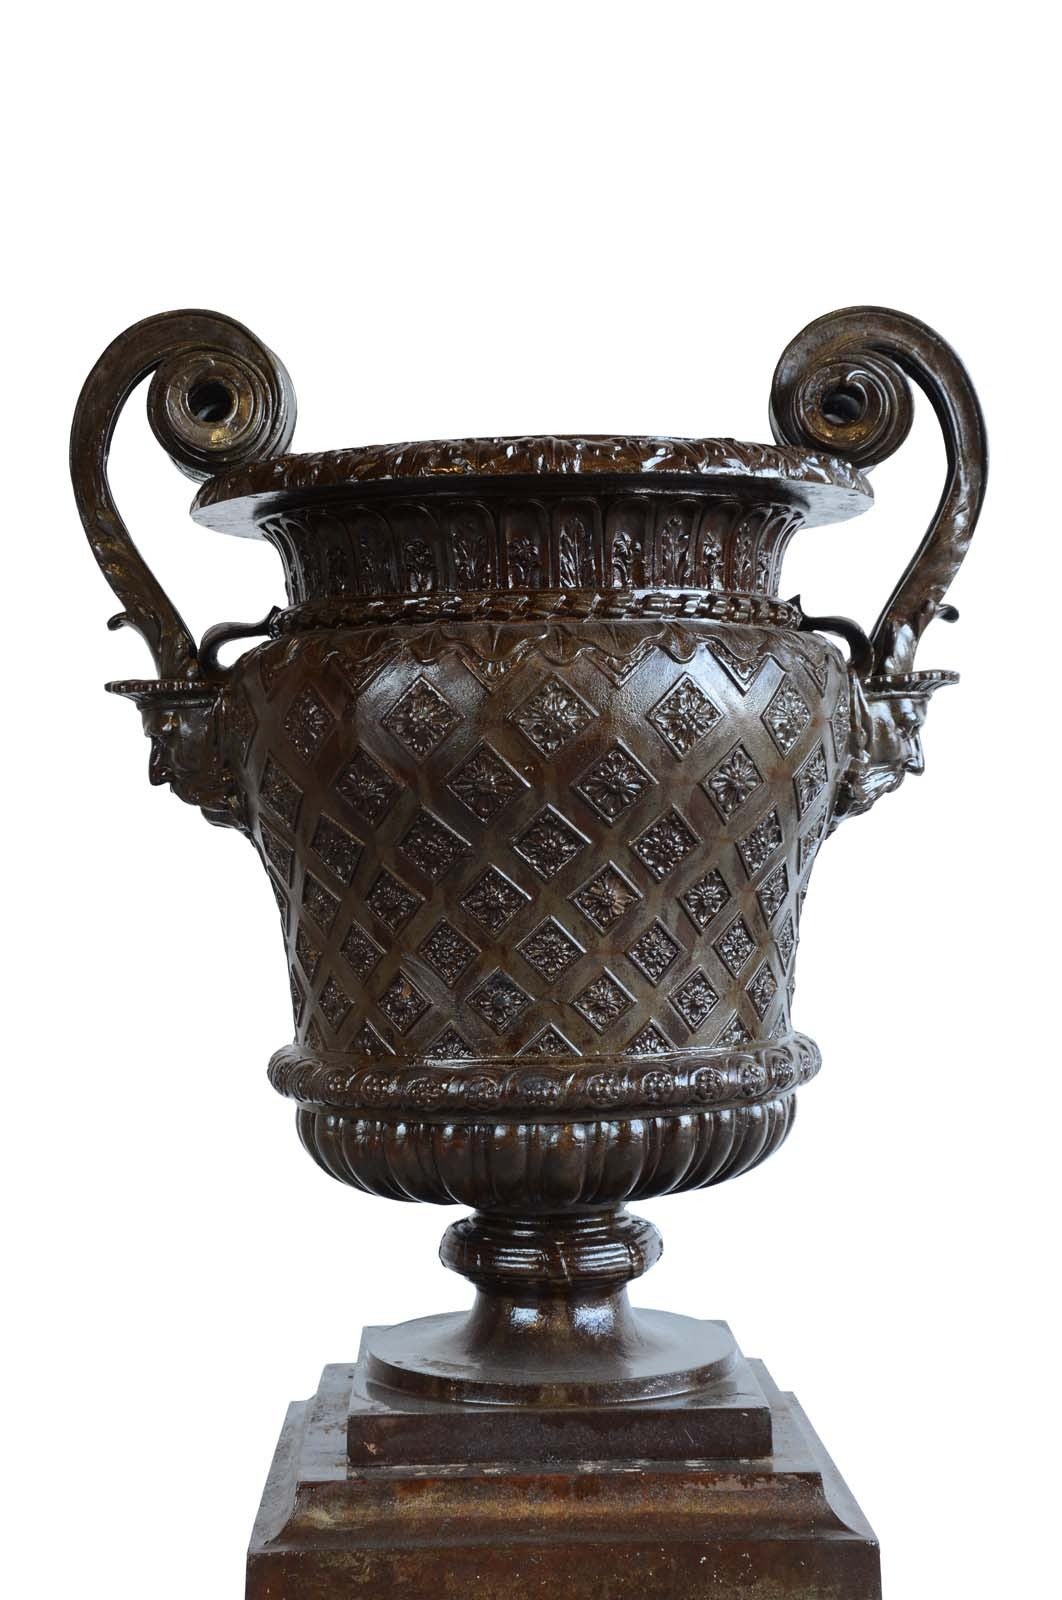 French Louis XIV style cast iron vase and its pedestal.
Dimensions:
Pedestal: 15 x 16 x 16 in.;
Vase: 32 x 28 x 20 in. (Base 11 x 11 in.).
 